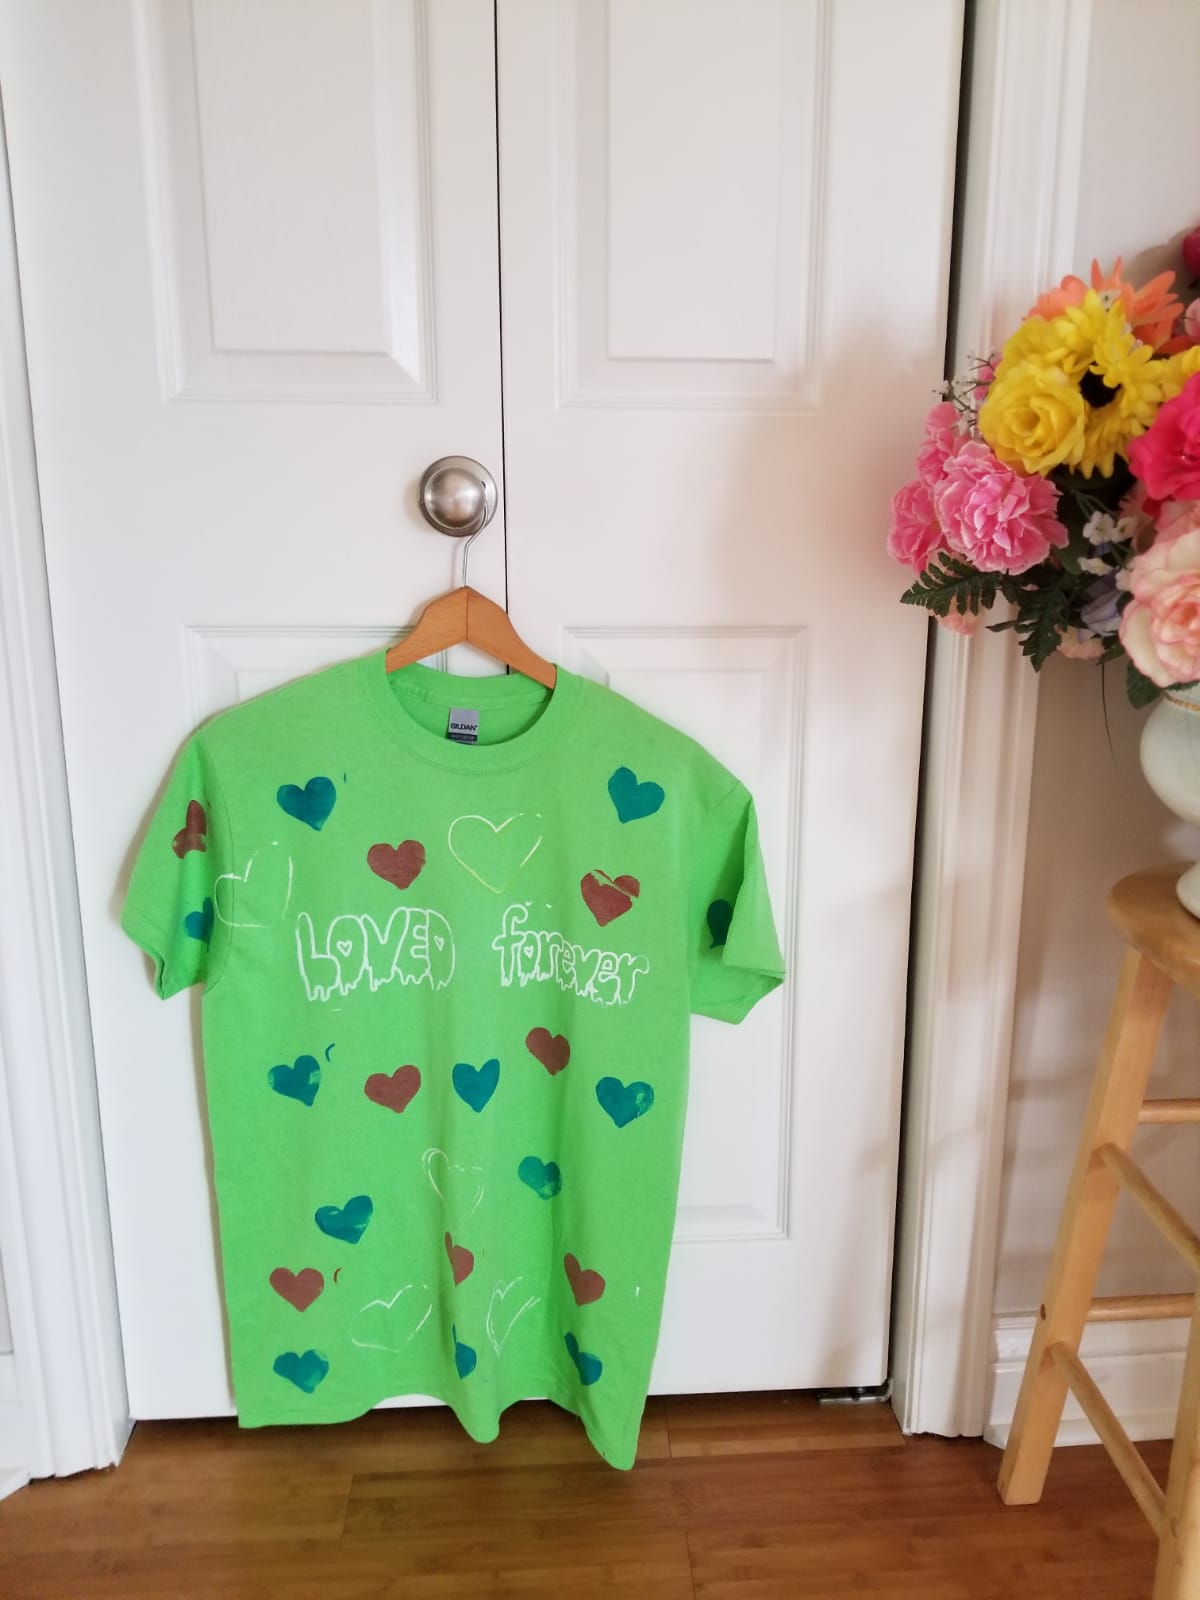 Hang on door handle a green shirt with printed hearts with text, Loved forever